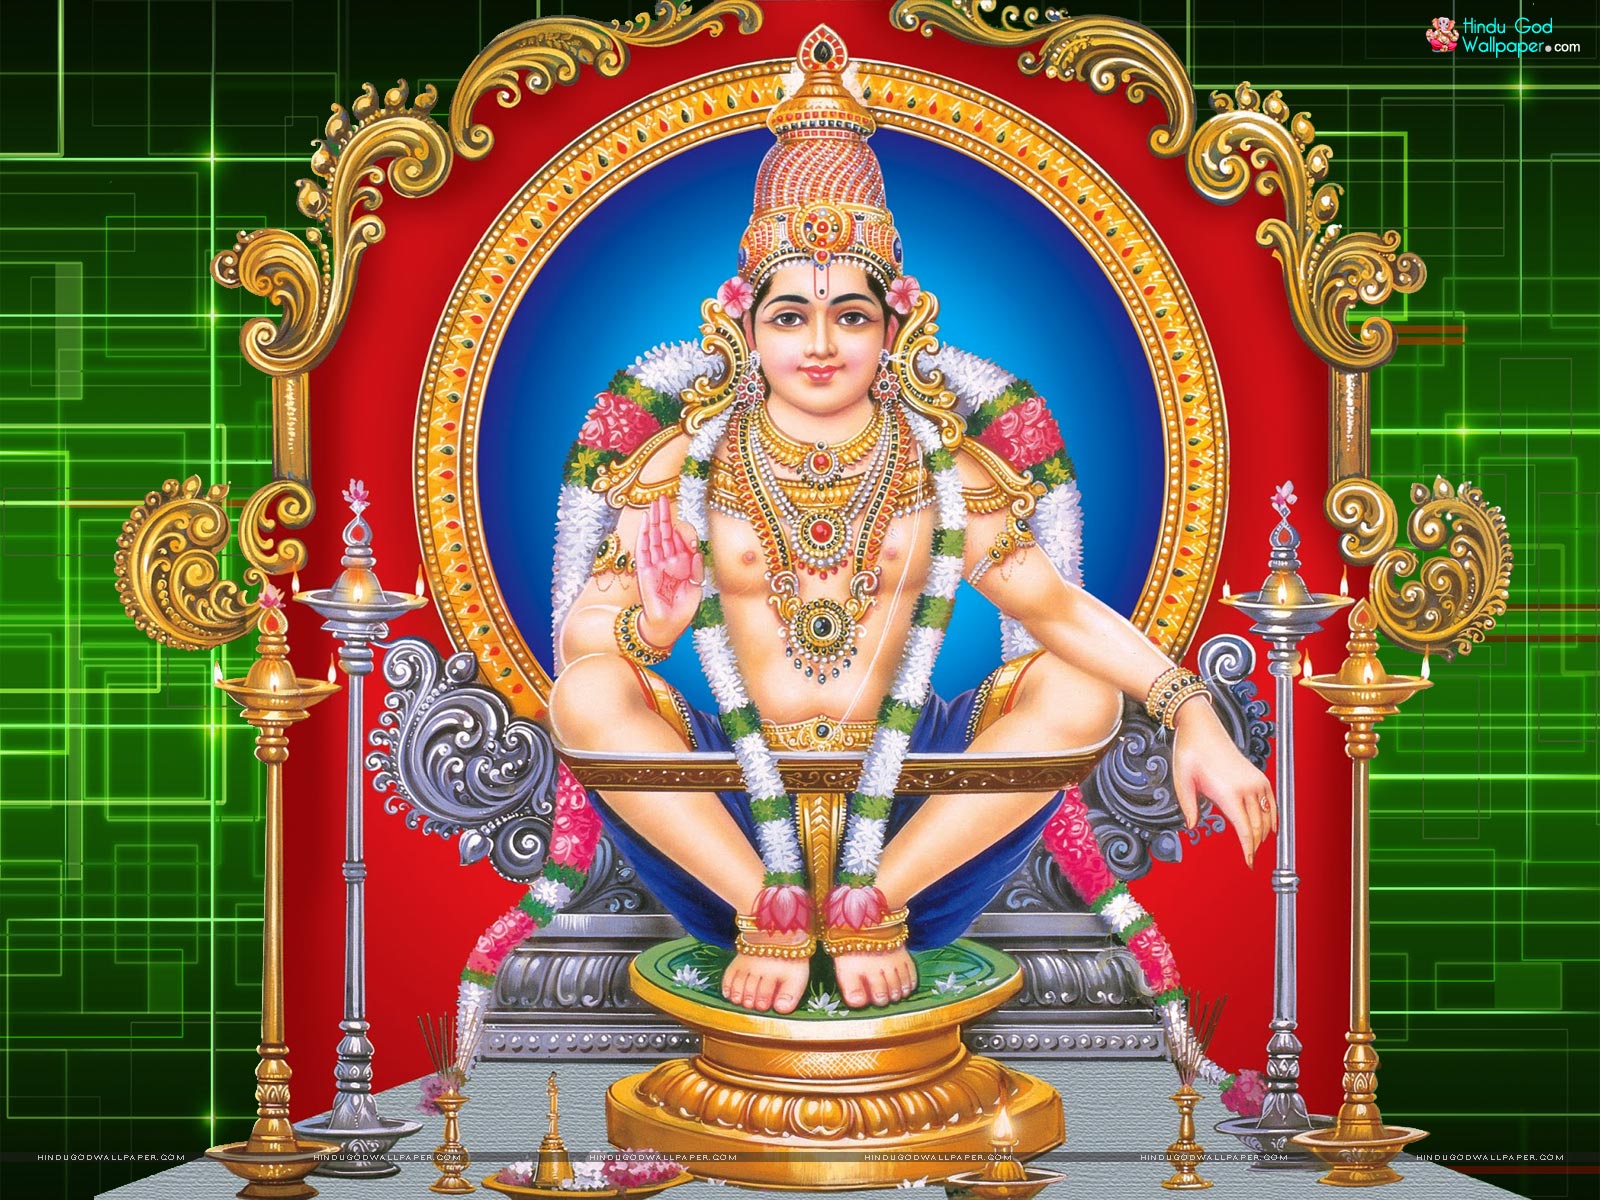 Swami Ayyappan Ayyappa 1080P Hd Images Download / In the past, the